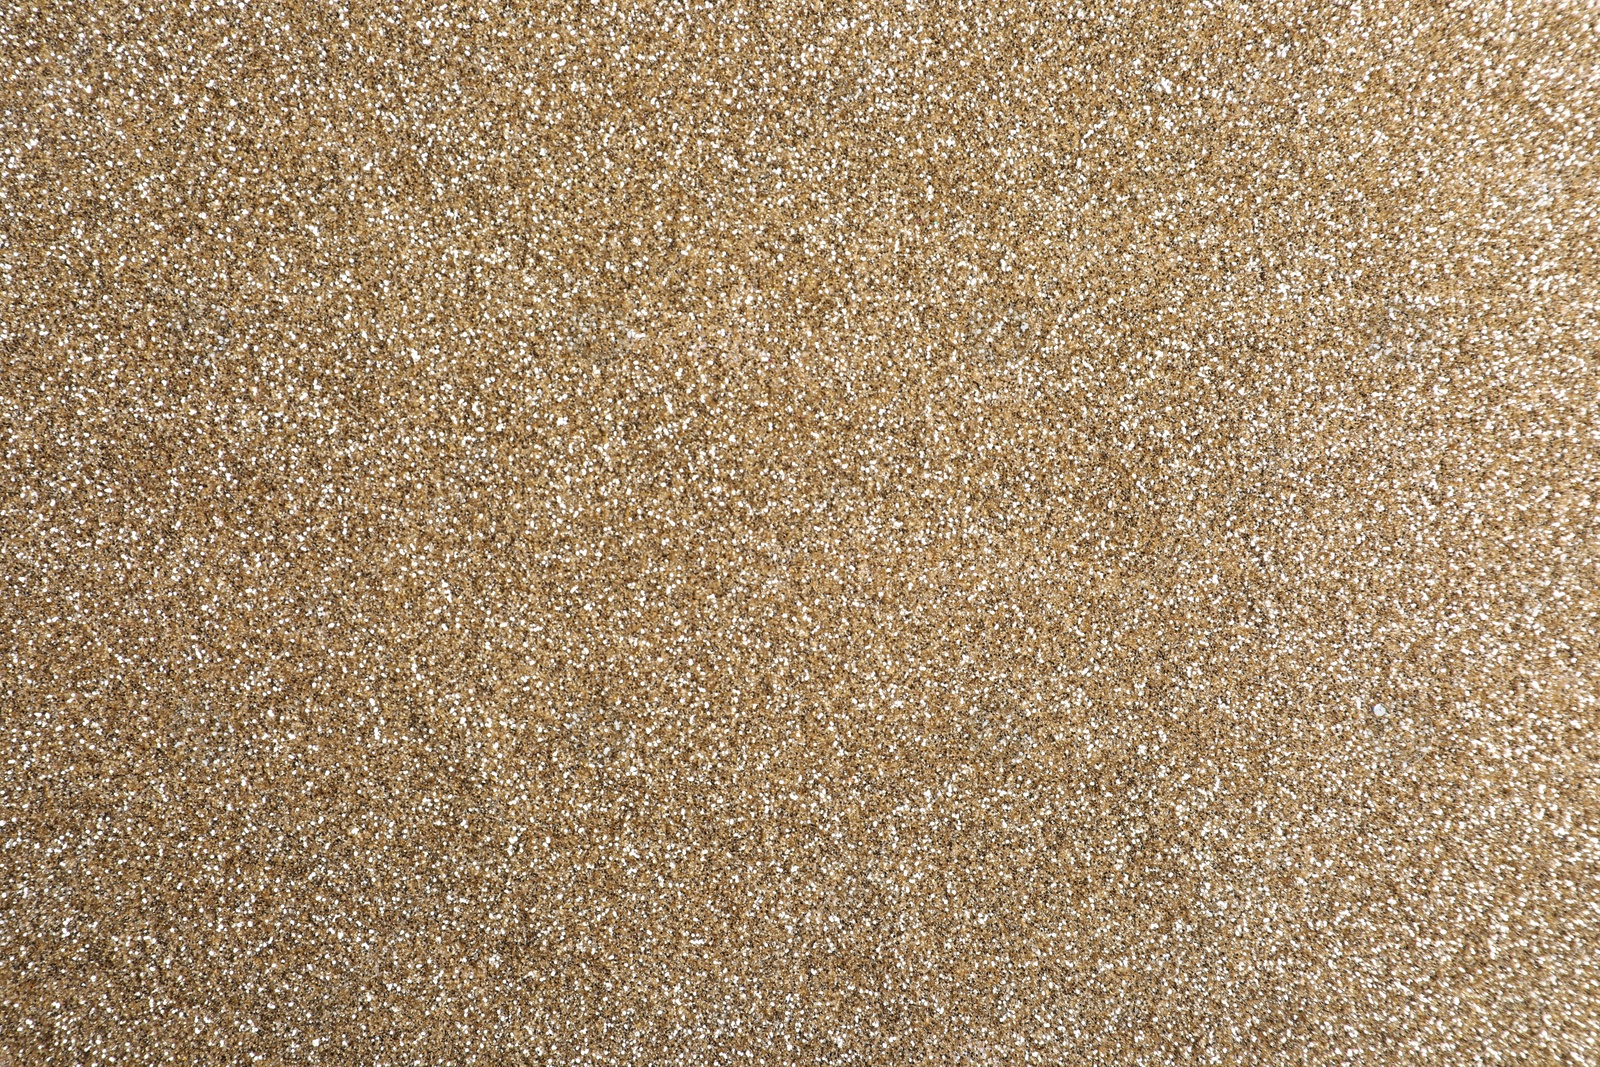 Photo of Shiny light brown glitter as background, closeup